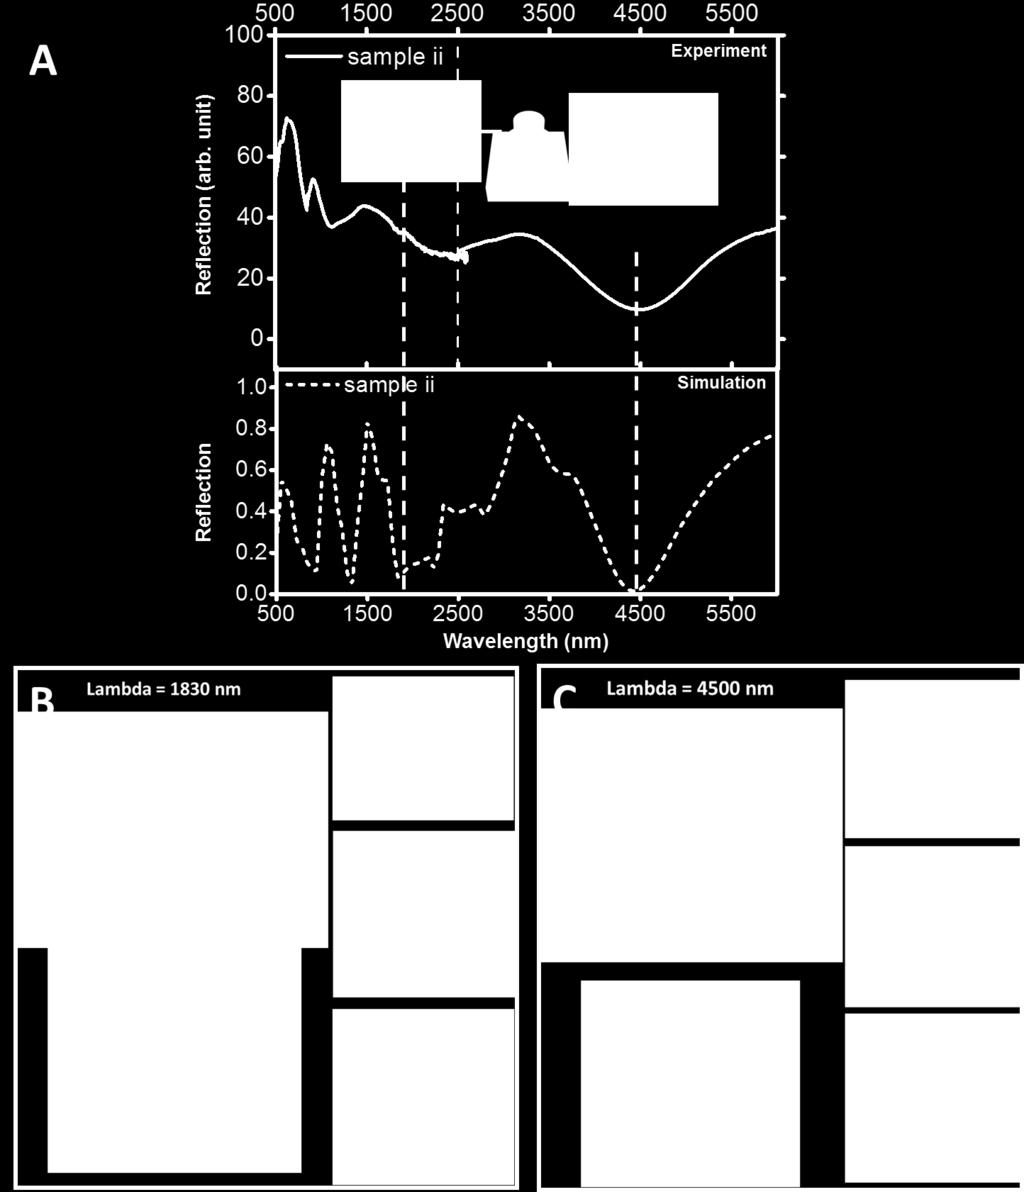 Figure S9. (A) The visible-infrared reflectance spectra of sample ii. Insets: simulation results of the electric-field distribution of sample ii under photoexcitation (cross section).